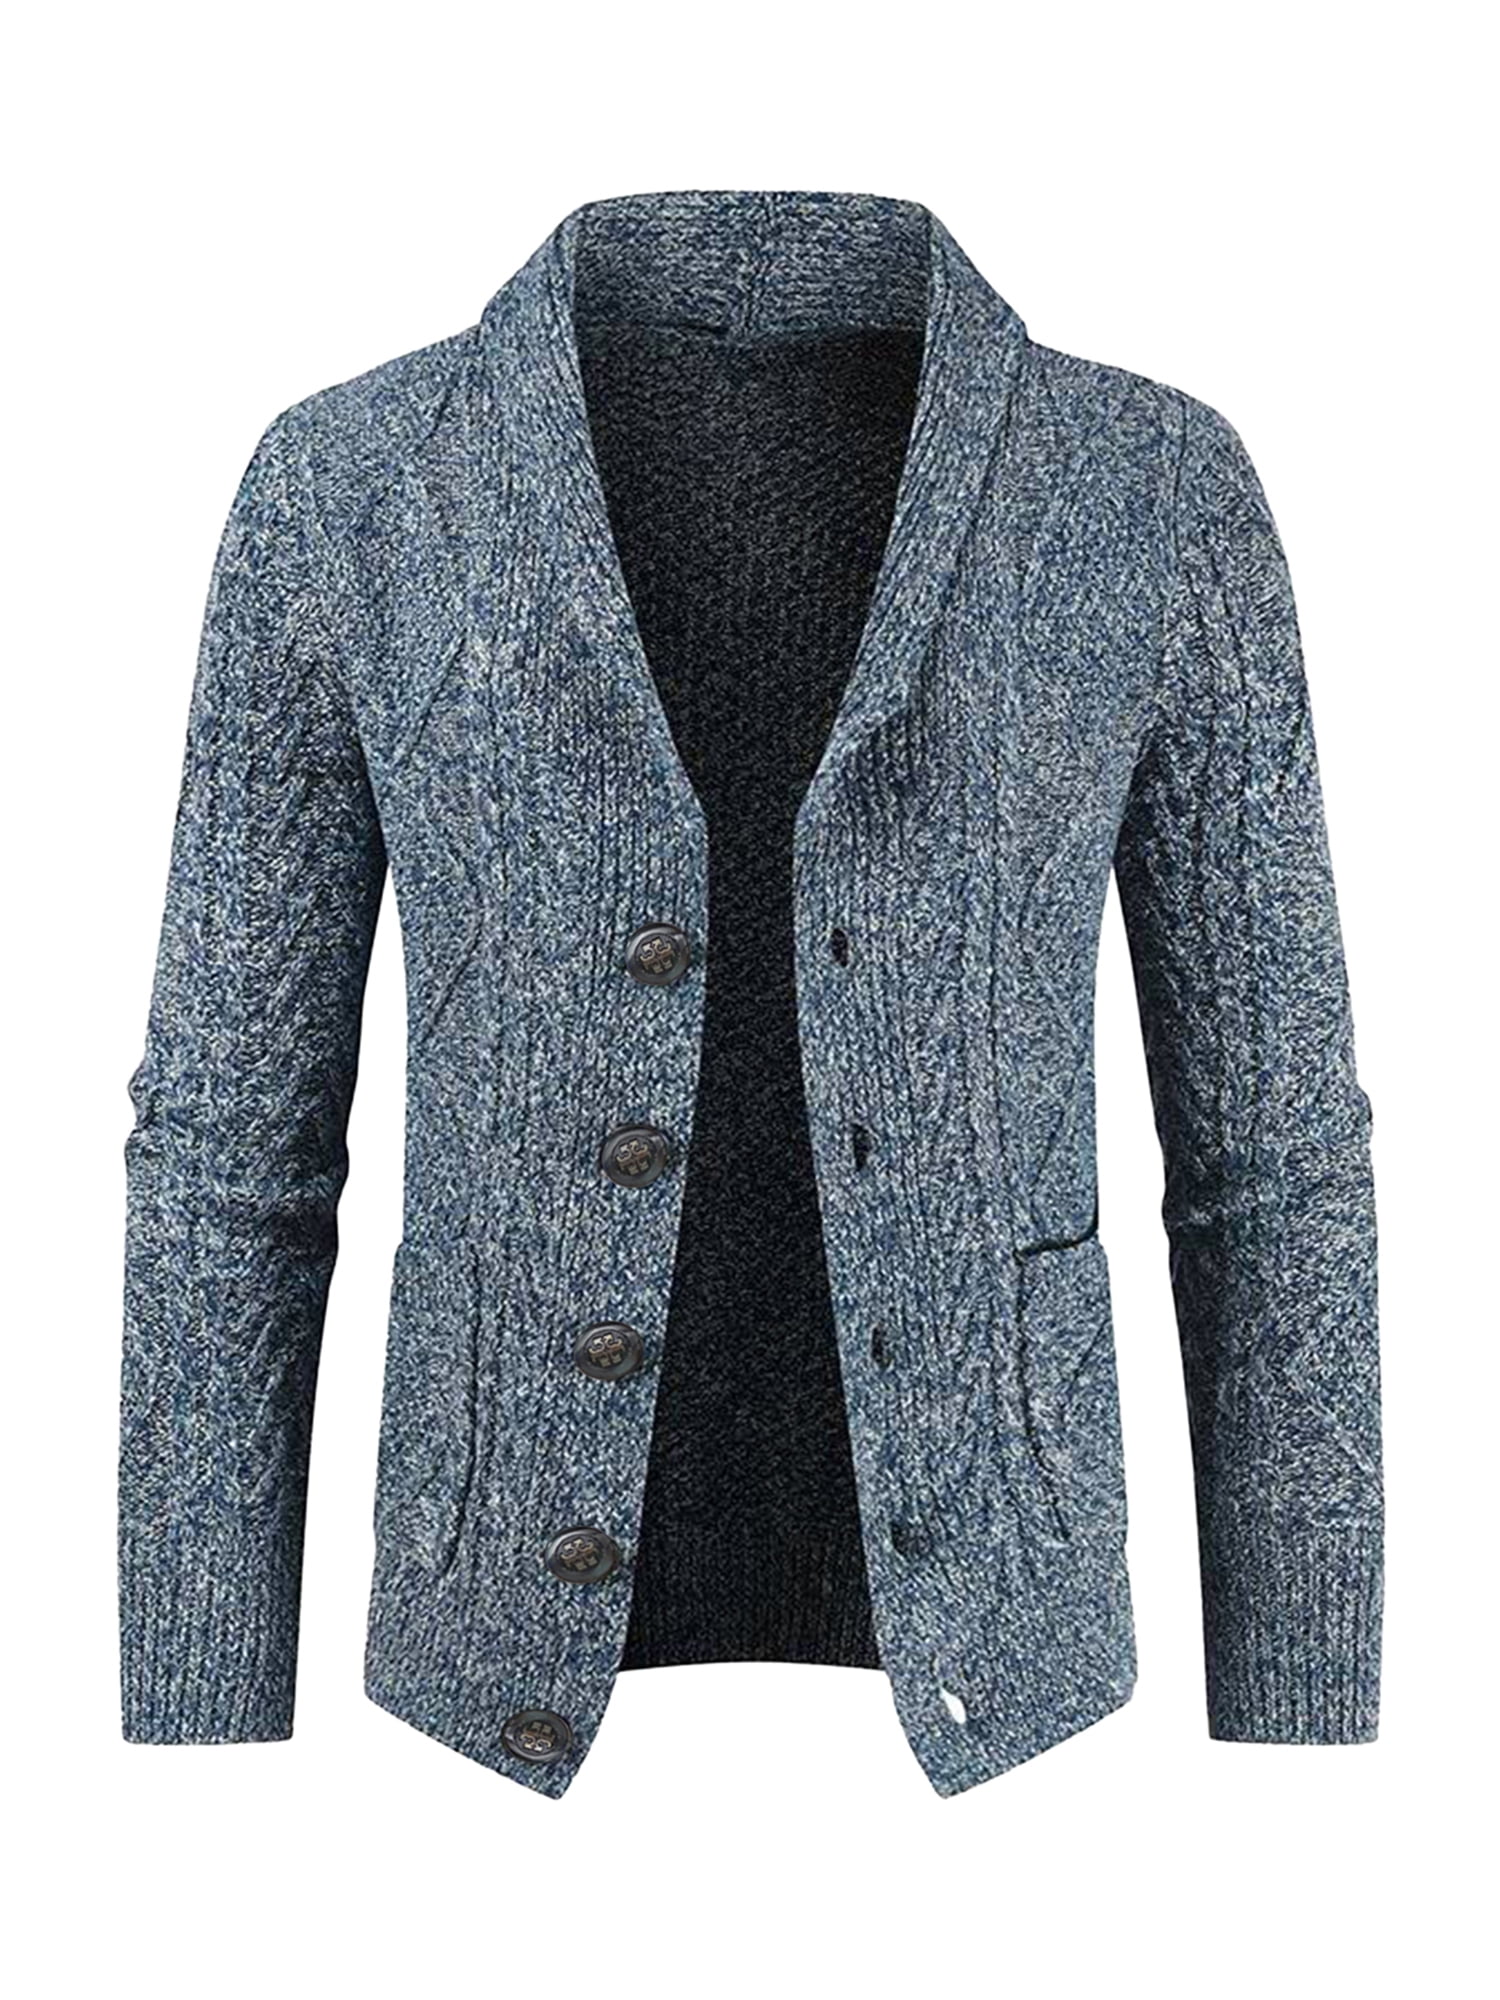 Men Cable Knit Cardigan Casual Long Sleeve Shawl Collar Sweater ...